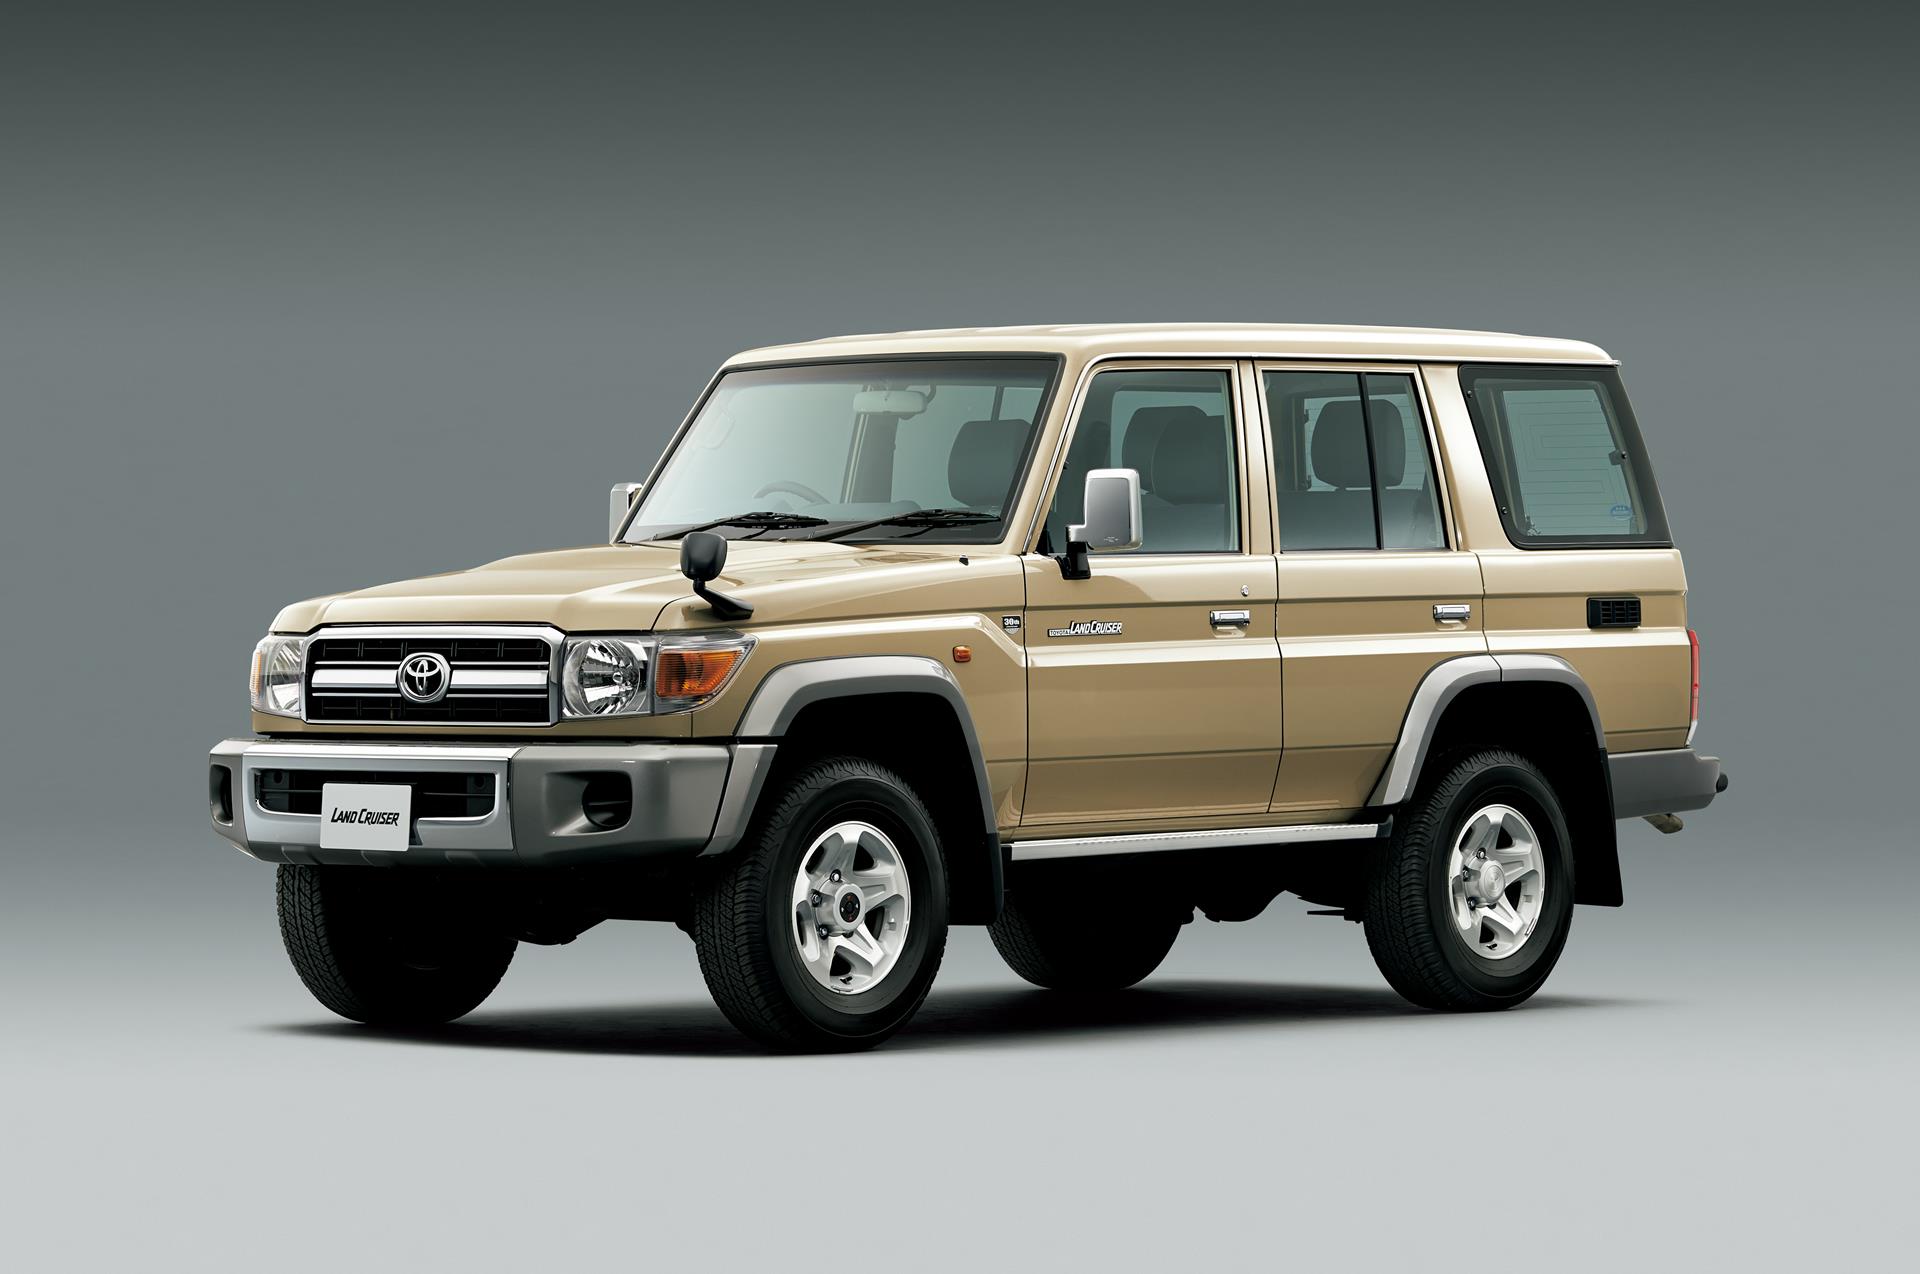 30 Years Of Toyota Land Cruiser 70 - Celebrating With Limited Edition ...